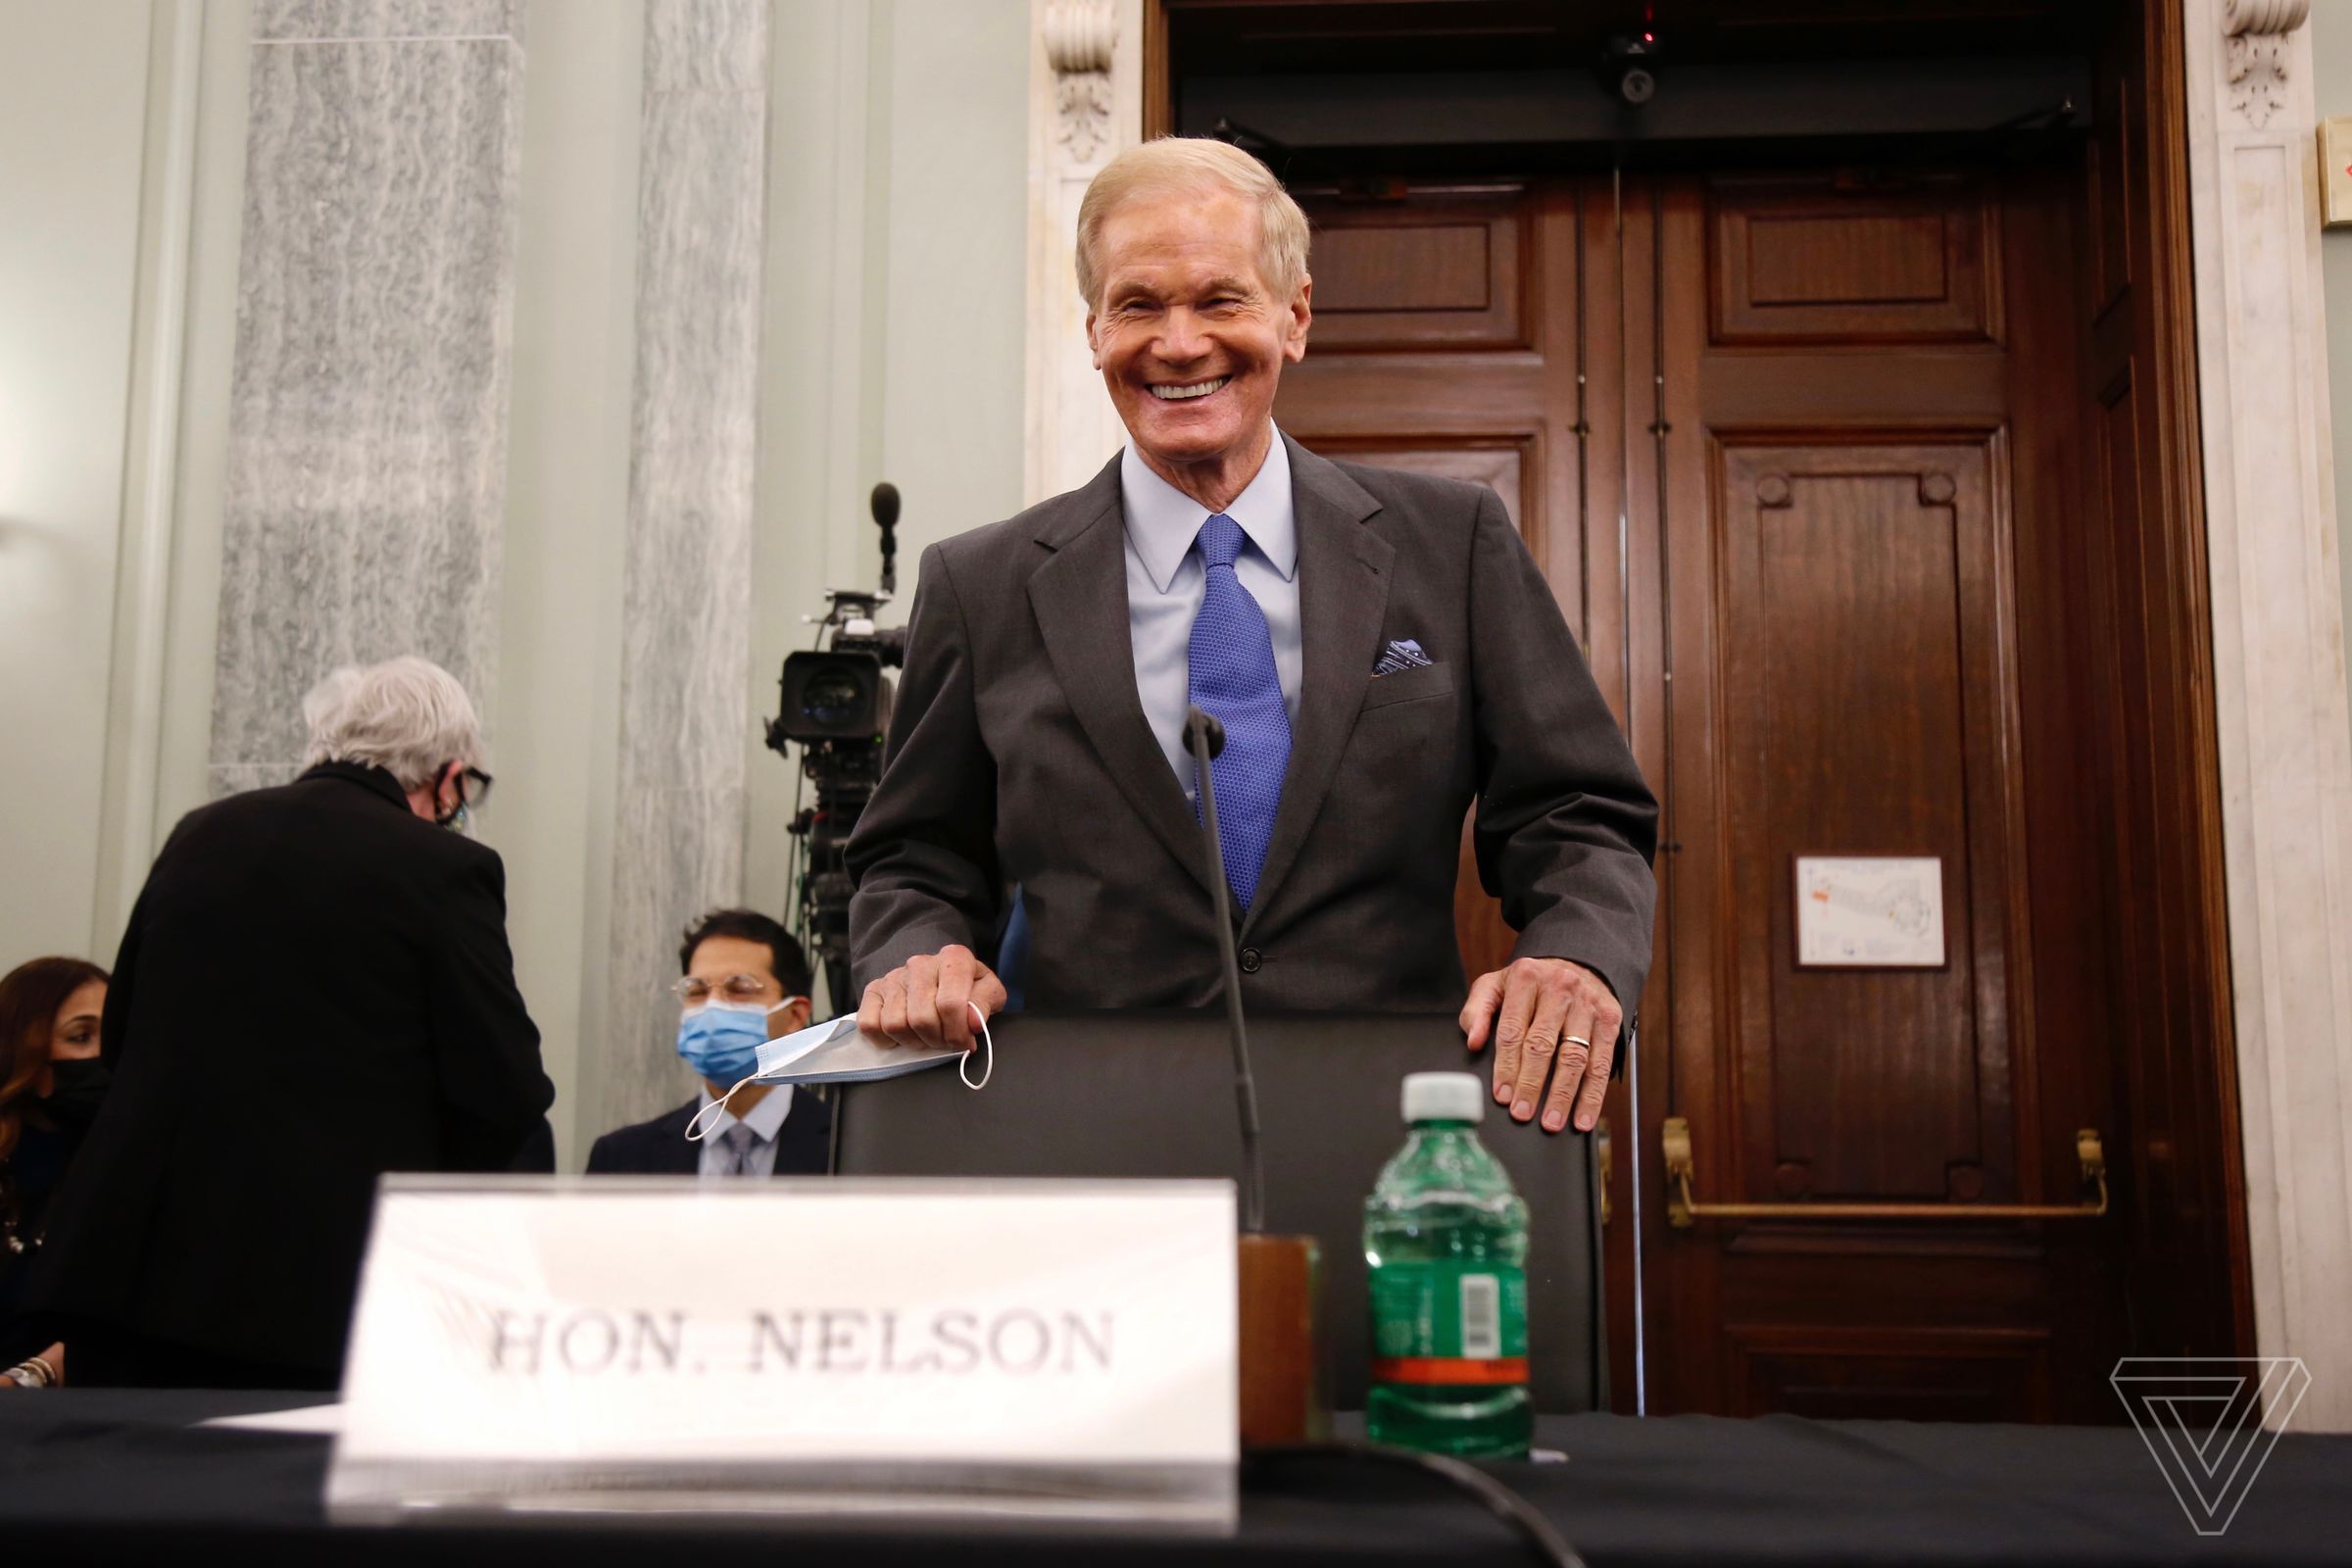 Nelson smiles for cameras before his Senate confirmation hearing to be NASA’s 14th administrator.